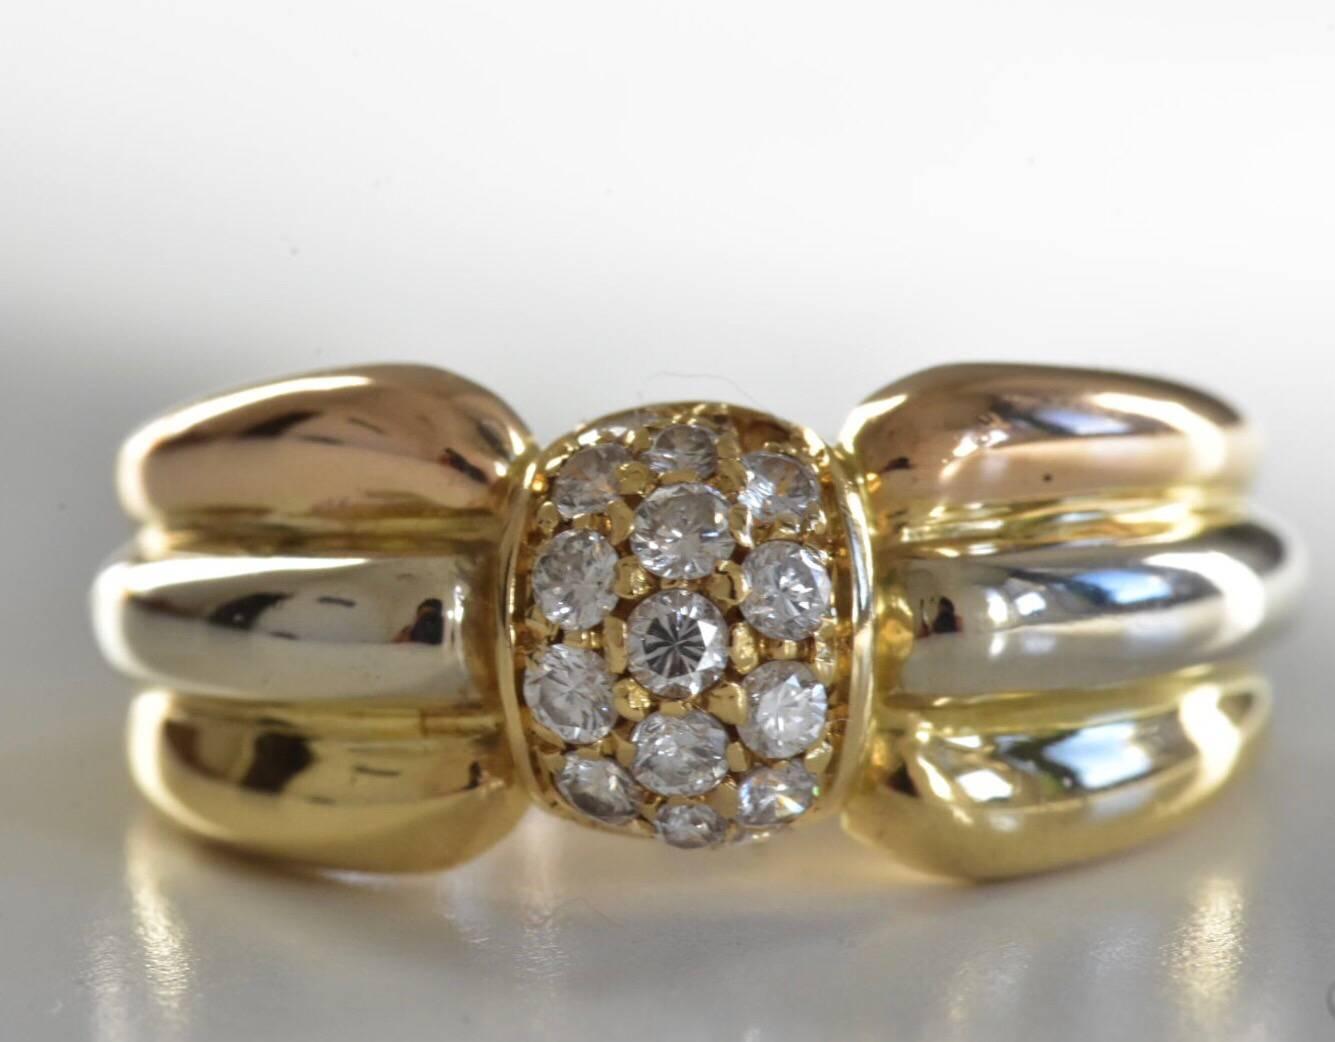 A vintage Cartier diamond tri-colour ring set in 18k gold. The ring features a central ball set with pave brilliant-cut round diamonds set to a yellow, white and rose gold band.
Ring size: UK L, US 5 1/2 EU 51
Measurements: ring top is 8mm